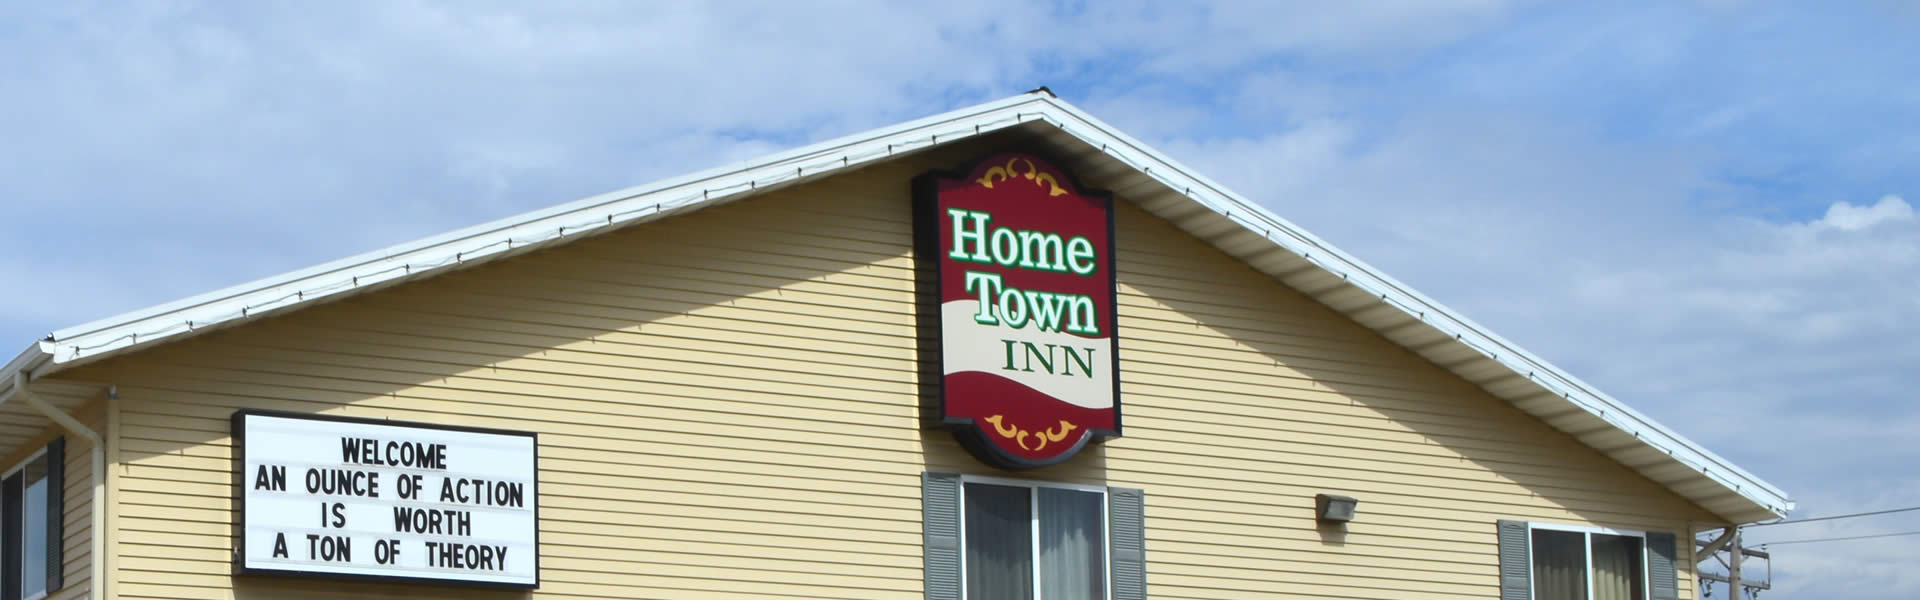 Enjoy a smoke-free stay when you book your hotel room at the Hometown inn of Mayville, ND.